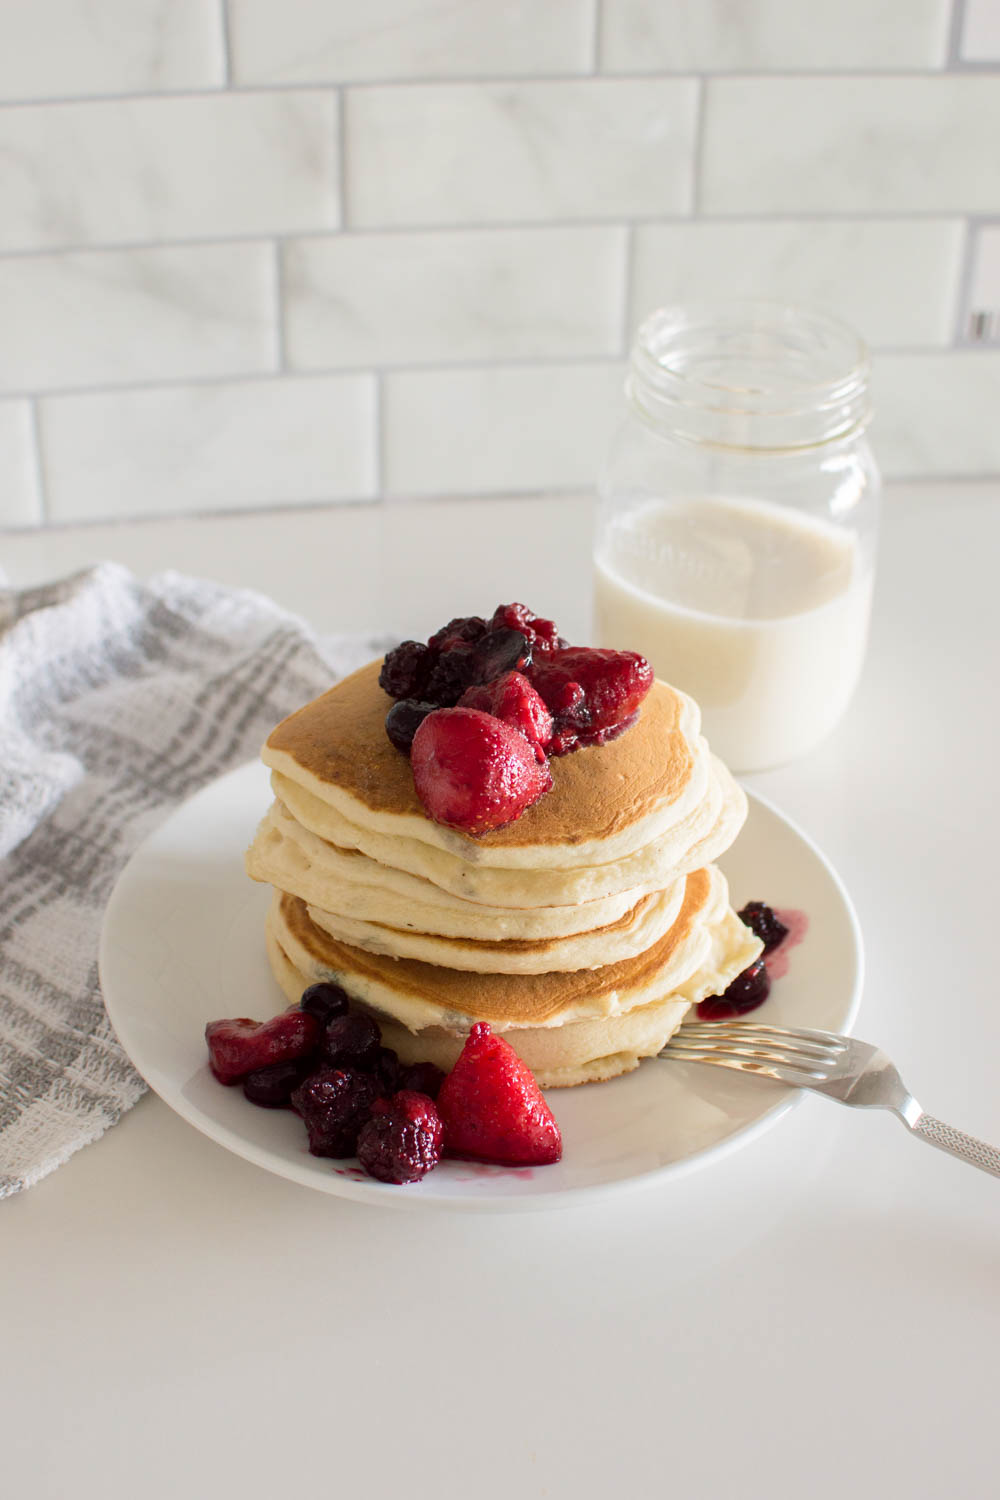 A stack of our delicious and easy homemade pancakes, topped with berry compote, sitting on a white plate and a fork